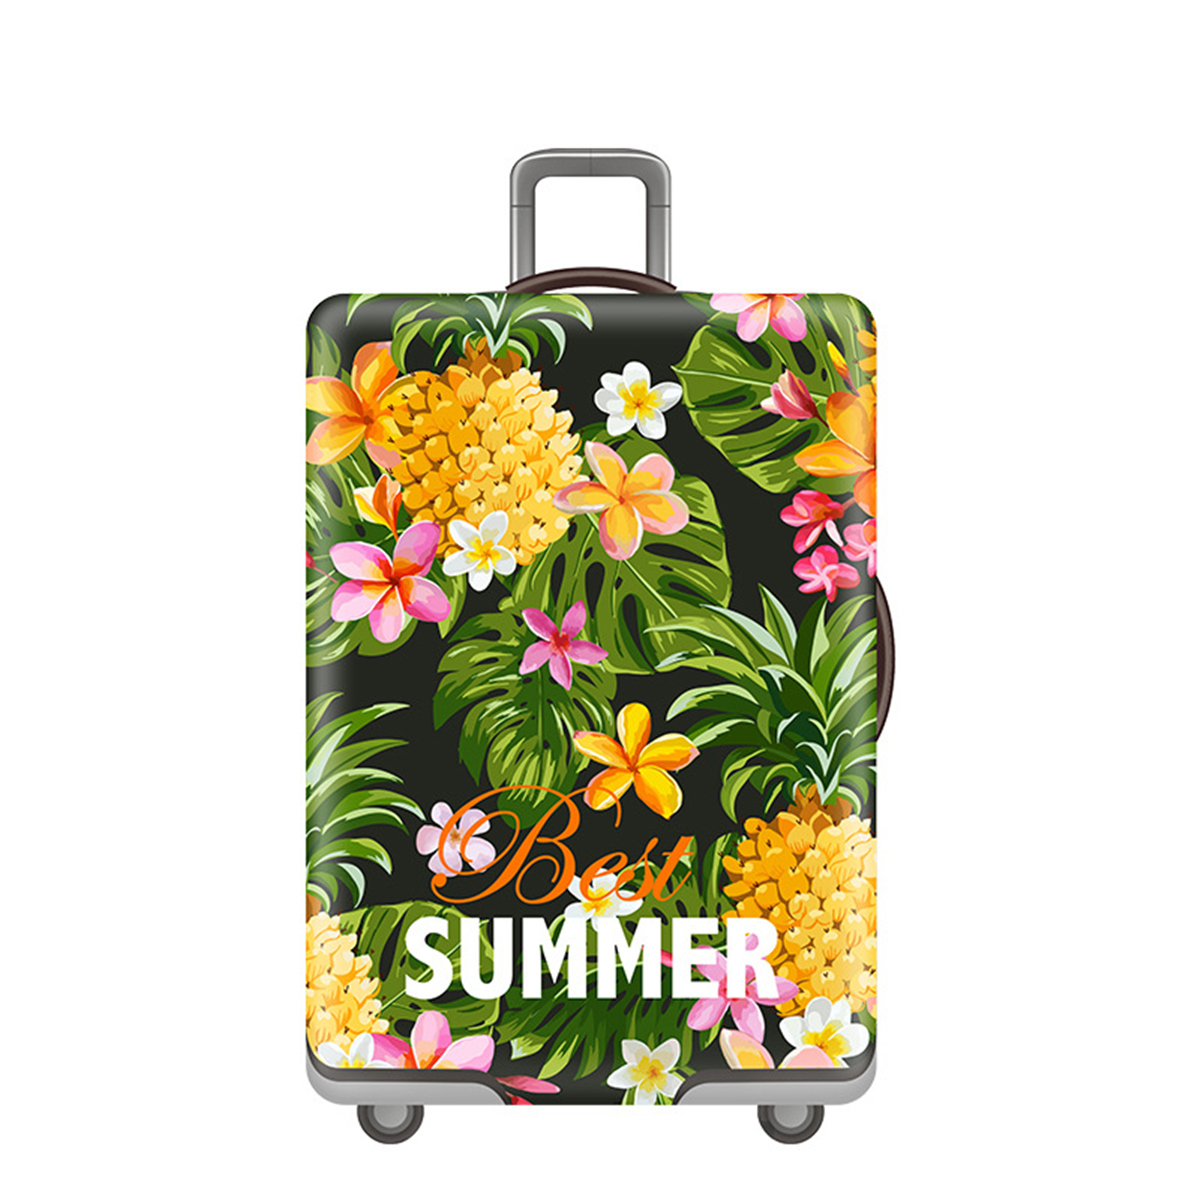 19-32-Inch-Summer-Hot-Elastic-Dustproof-Travel-Luggage-Cover-Suitcase-Protective-Sleeve-1401417-3